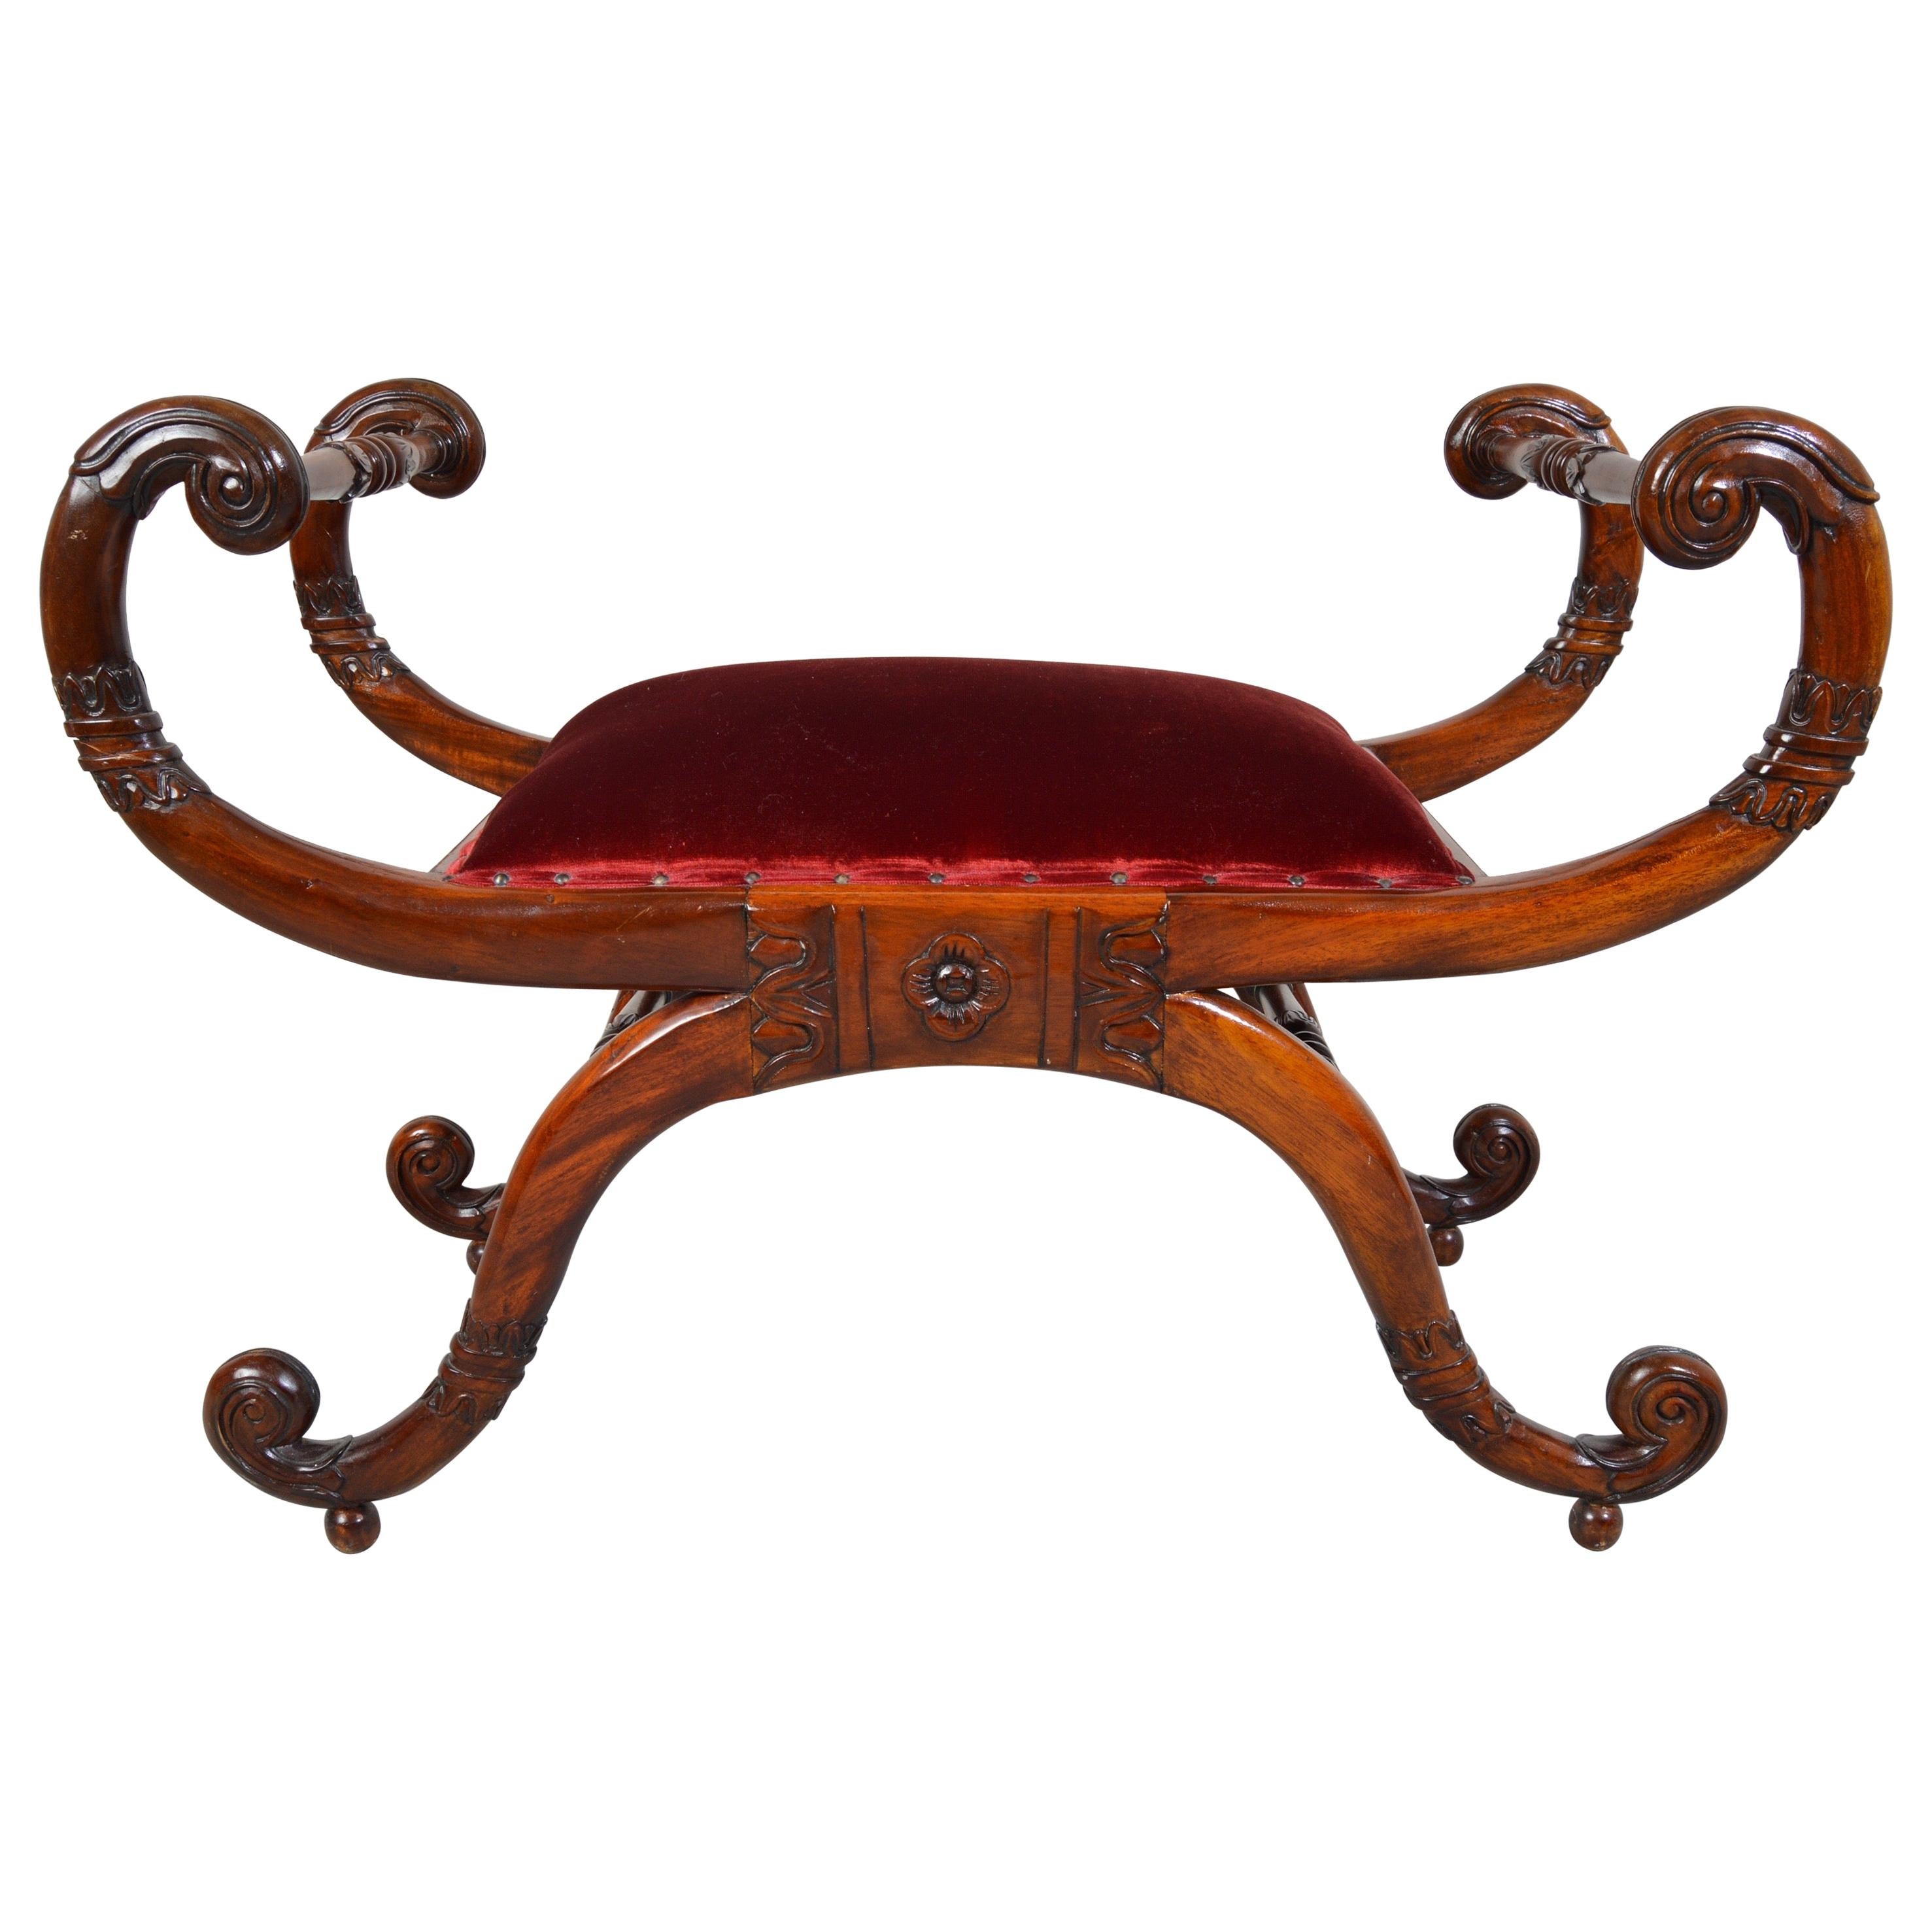 Regency Neoclassical Style Scrolled Arm Bench or Chair